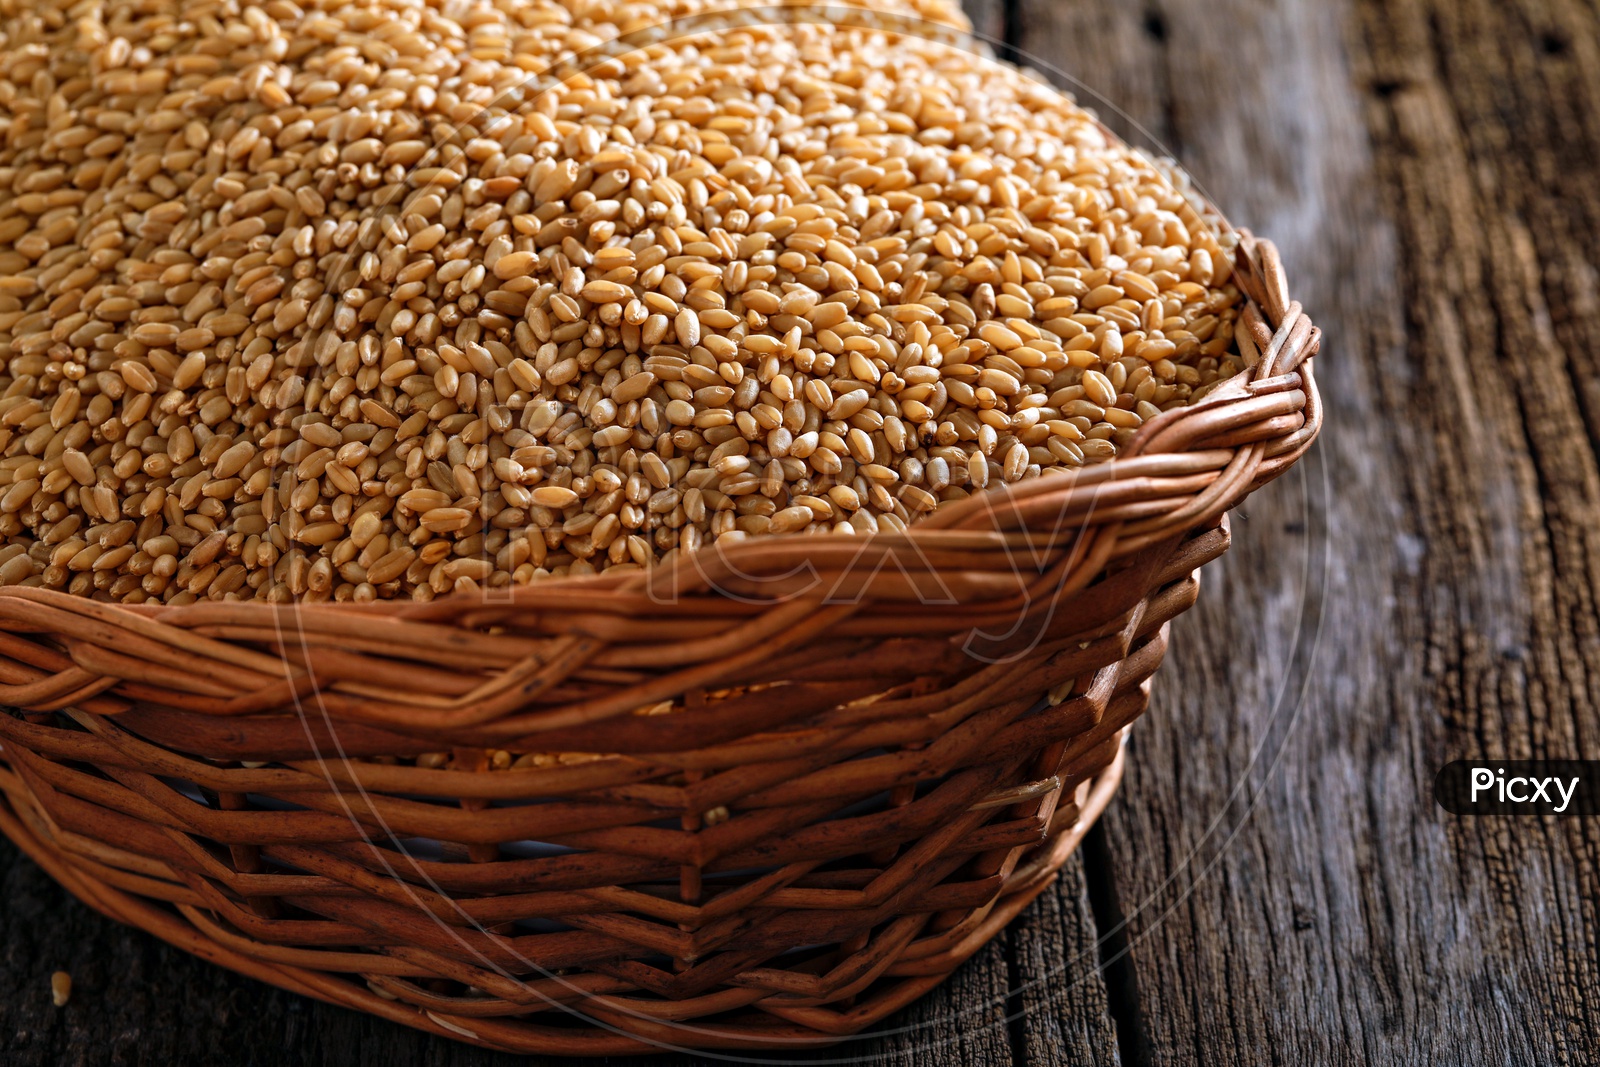 Wheat Grains In an Wooden Weaved Basket On an Isolated Wooden Background